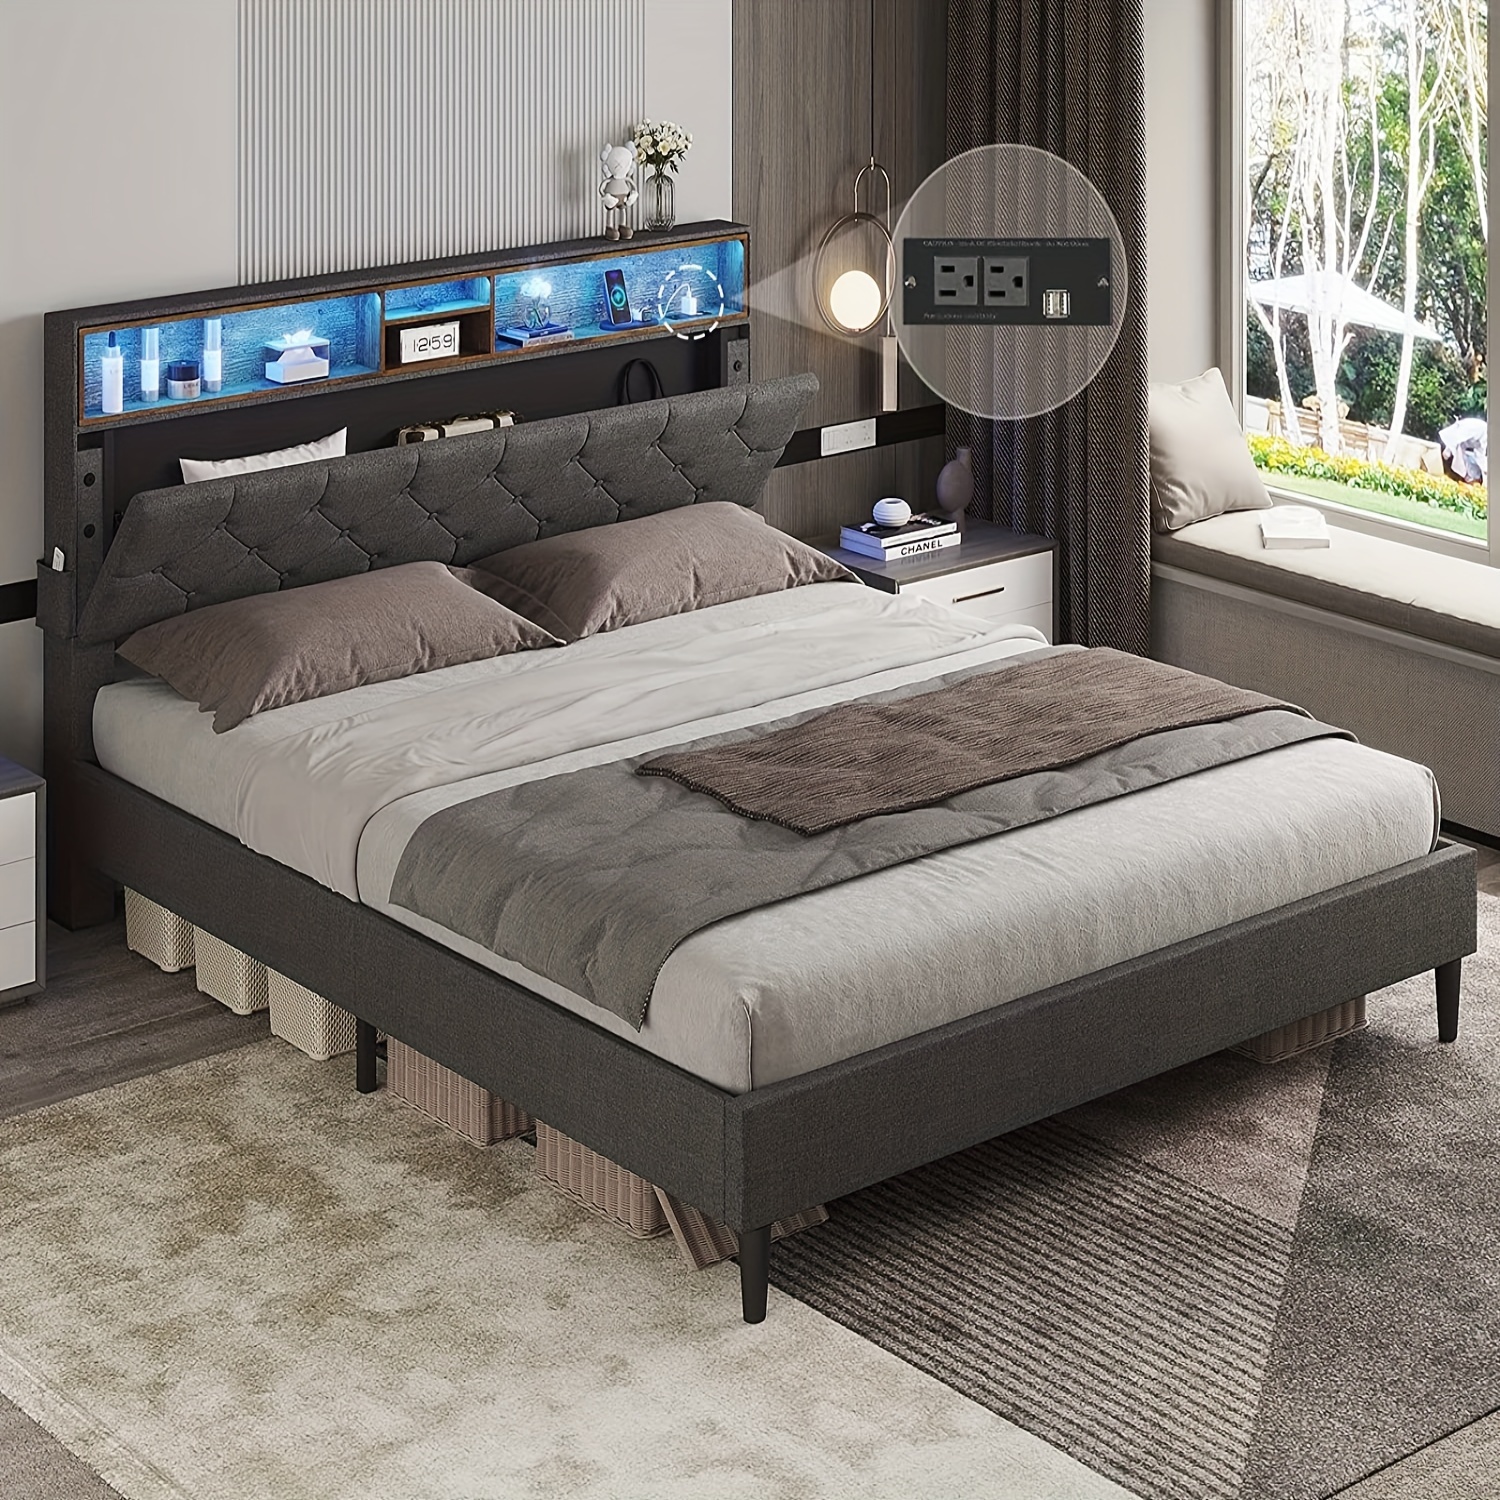 

Platform Bed Frame With Led Lights & Power Outlets, Full Size Bed With Headboard Hidden Storage & Shelves, No Box Spring Needed, Gray